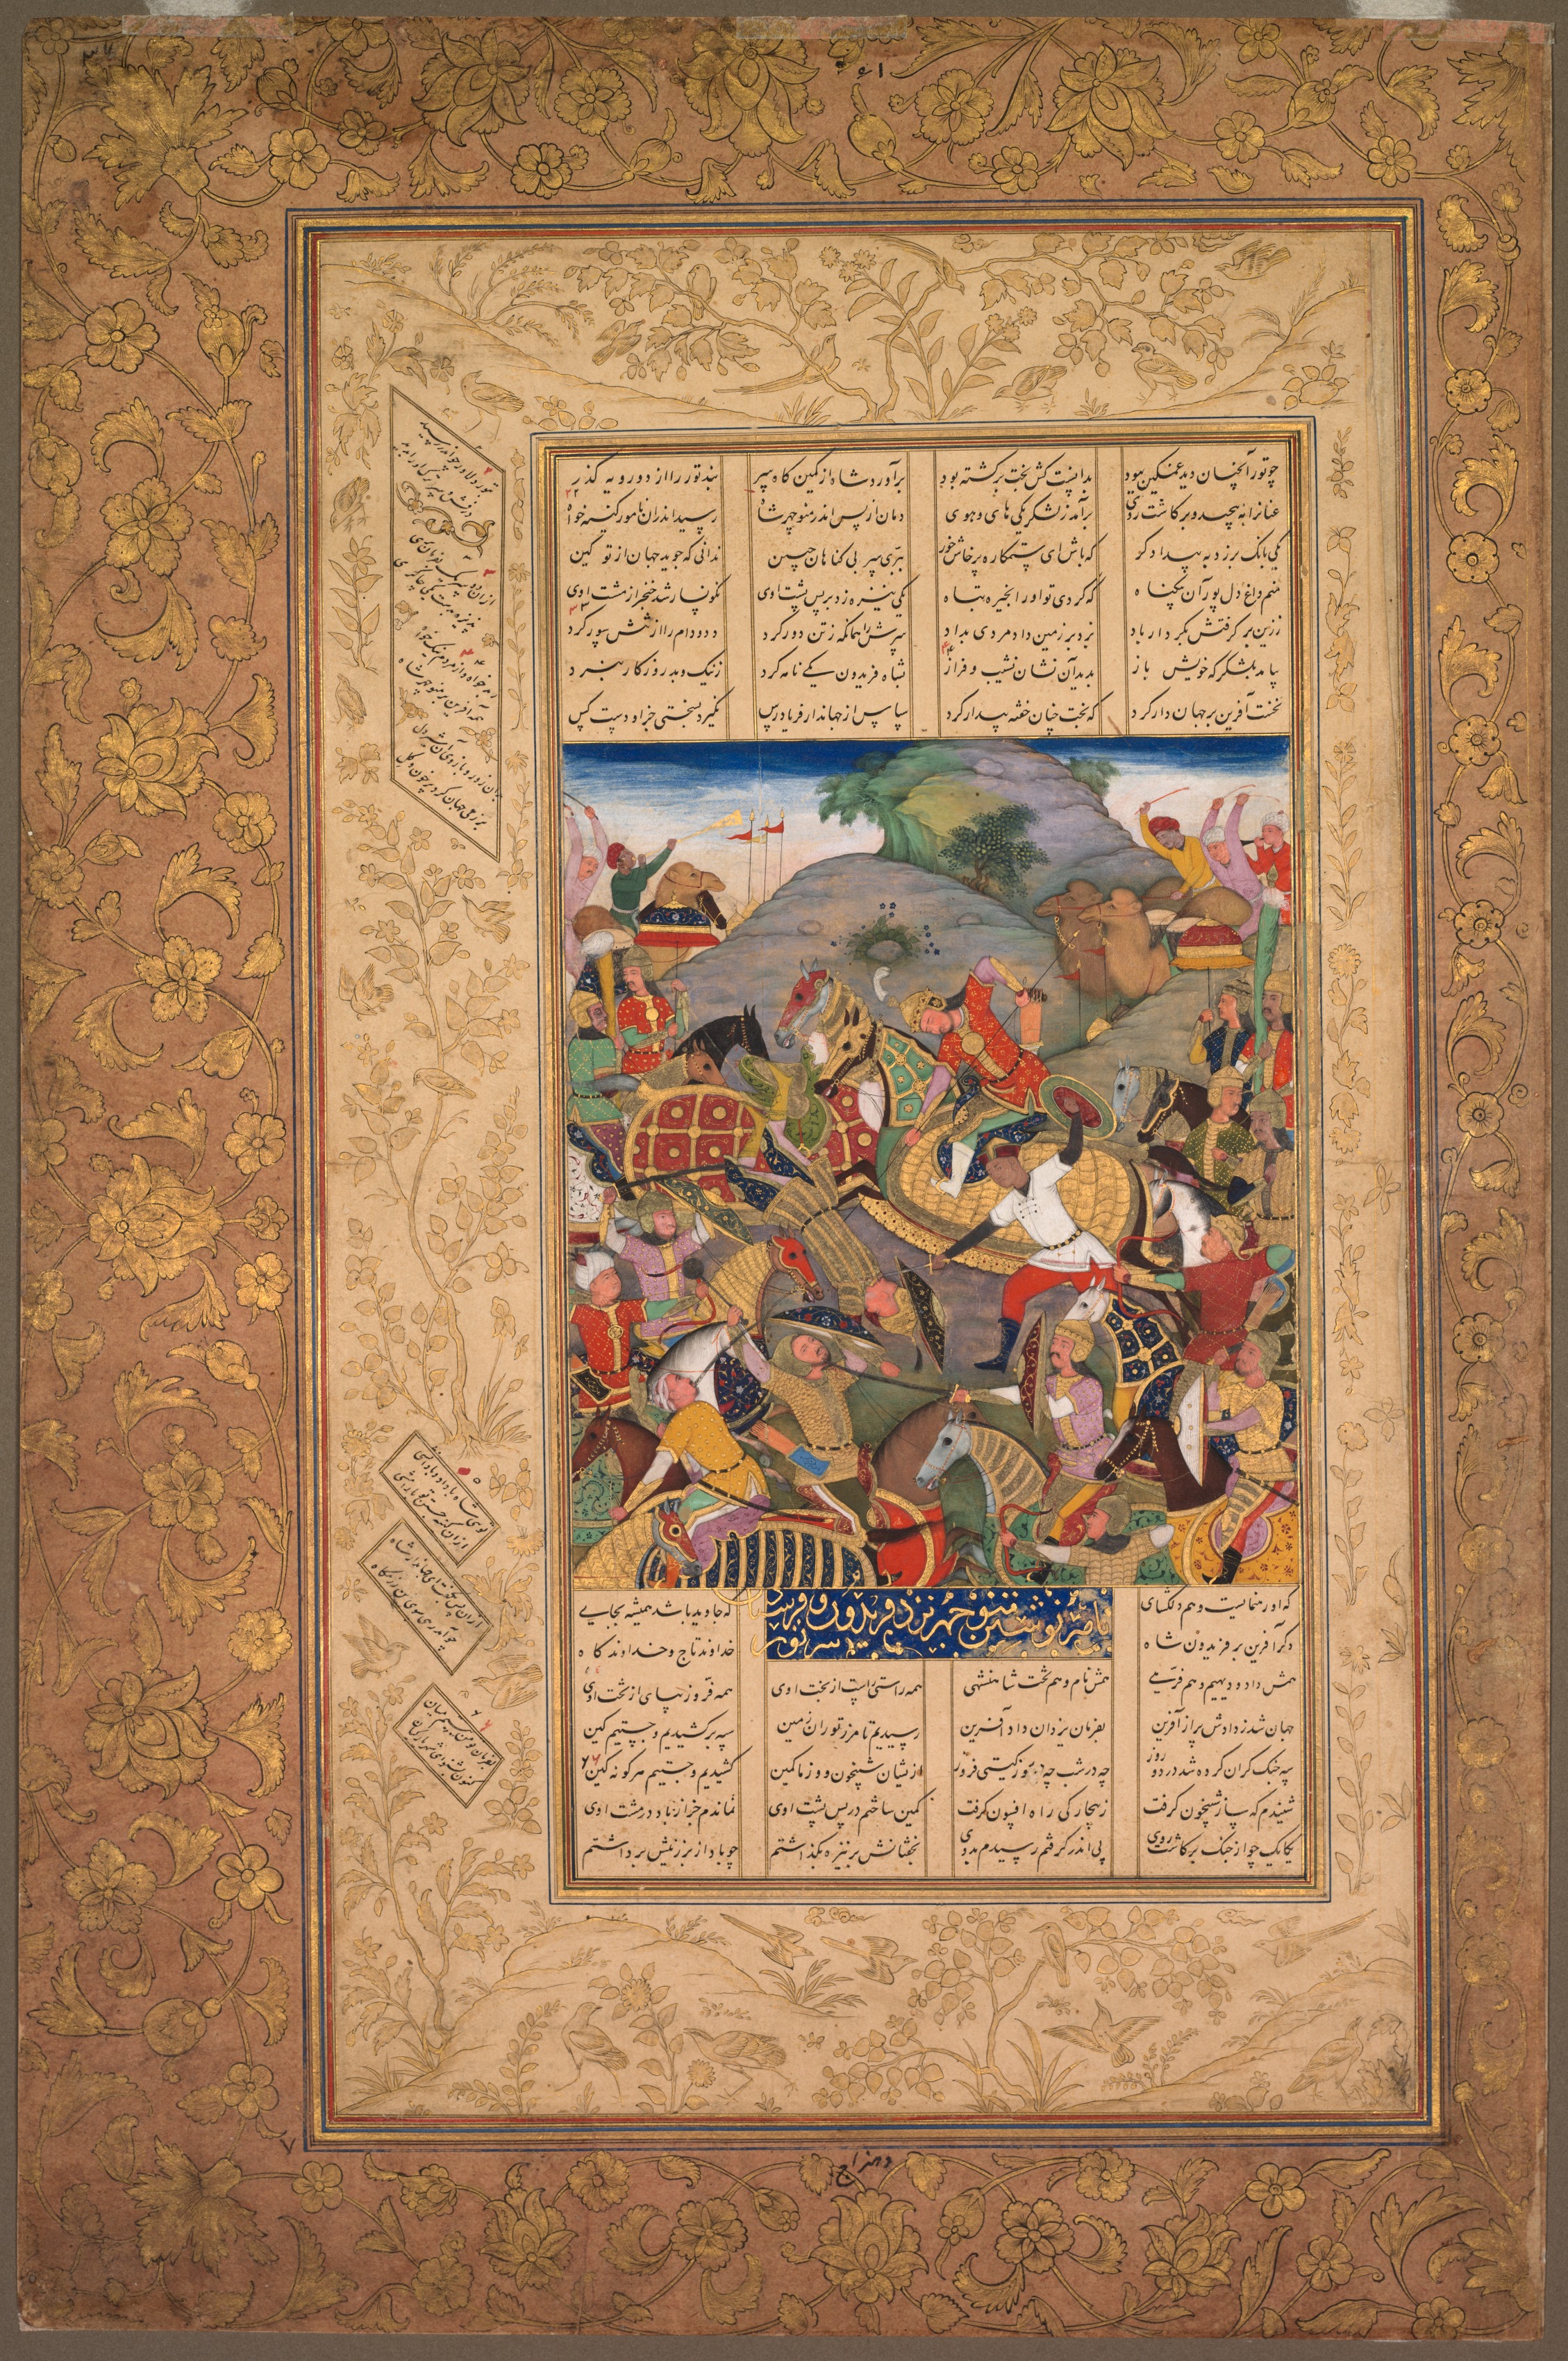 Battle between Manuchihr and Tur, from a Shah-nama (Book of Kings) of Firdausi (Persian, c. 934–1020)